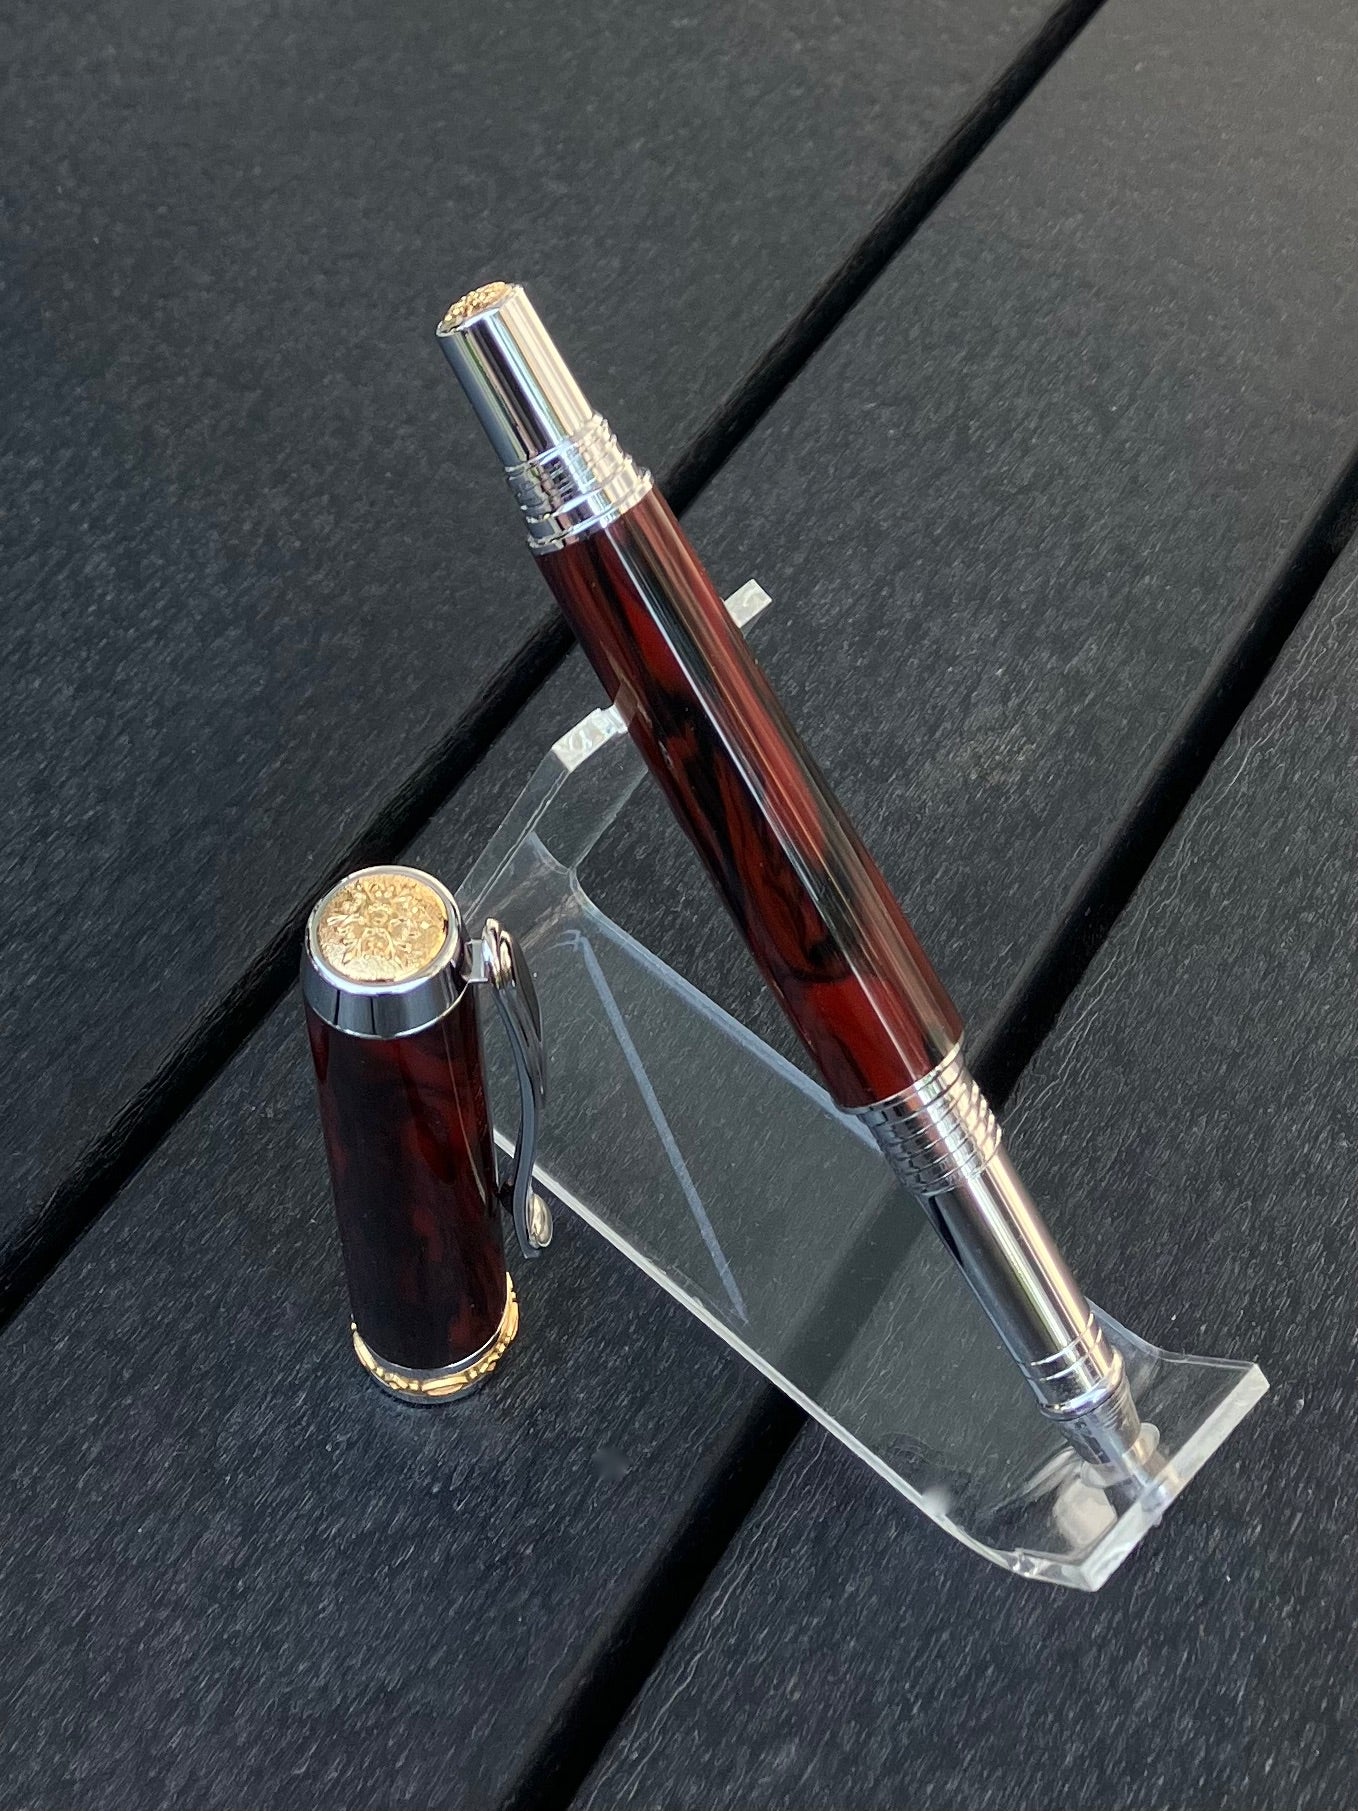 Mahogany Obsidian - Handcrafted Rollerball Pen.  This stunning pen is made with TruStone, a combination of real stone powder and acrylic resin, and features Rhodium with Gold accents for a luxurious look.